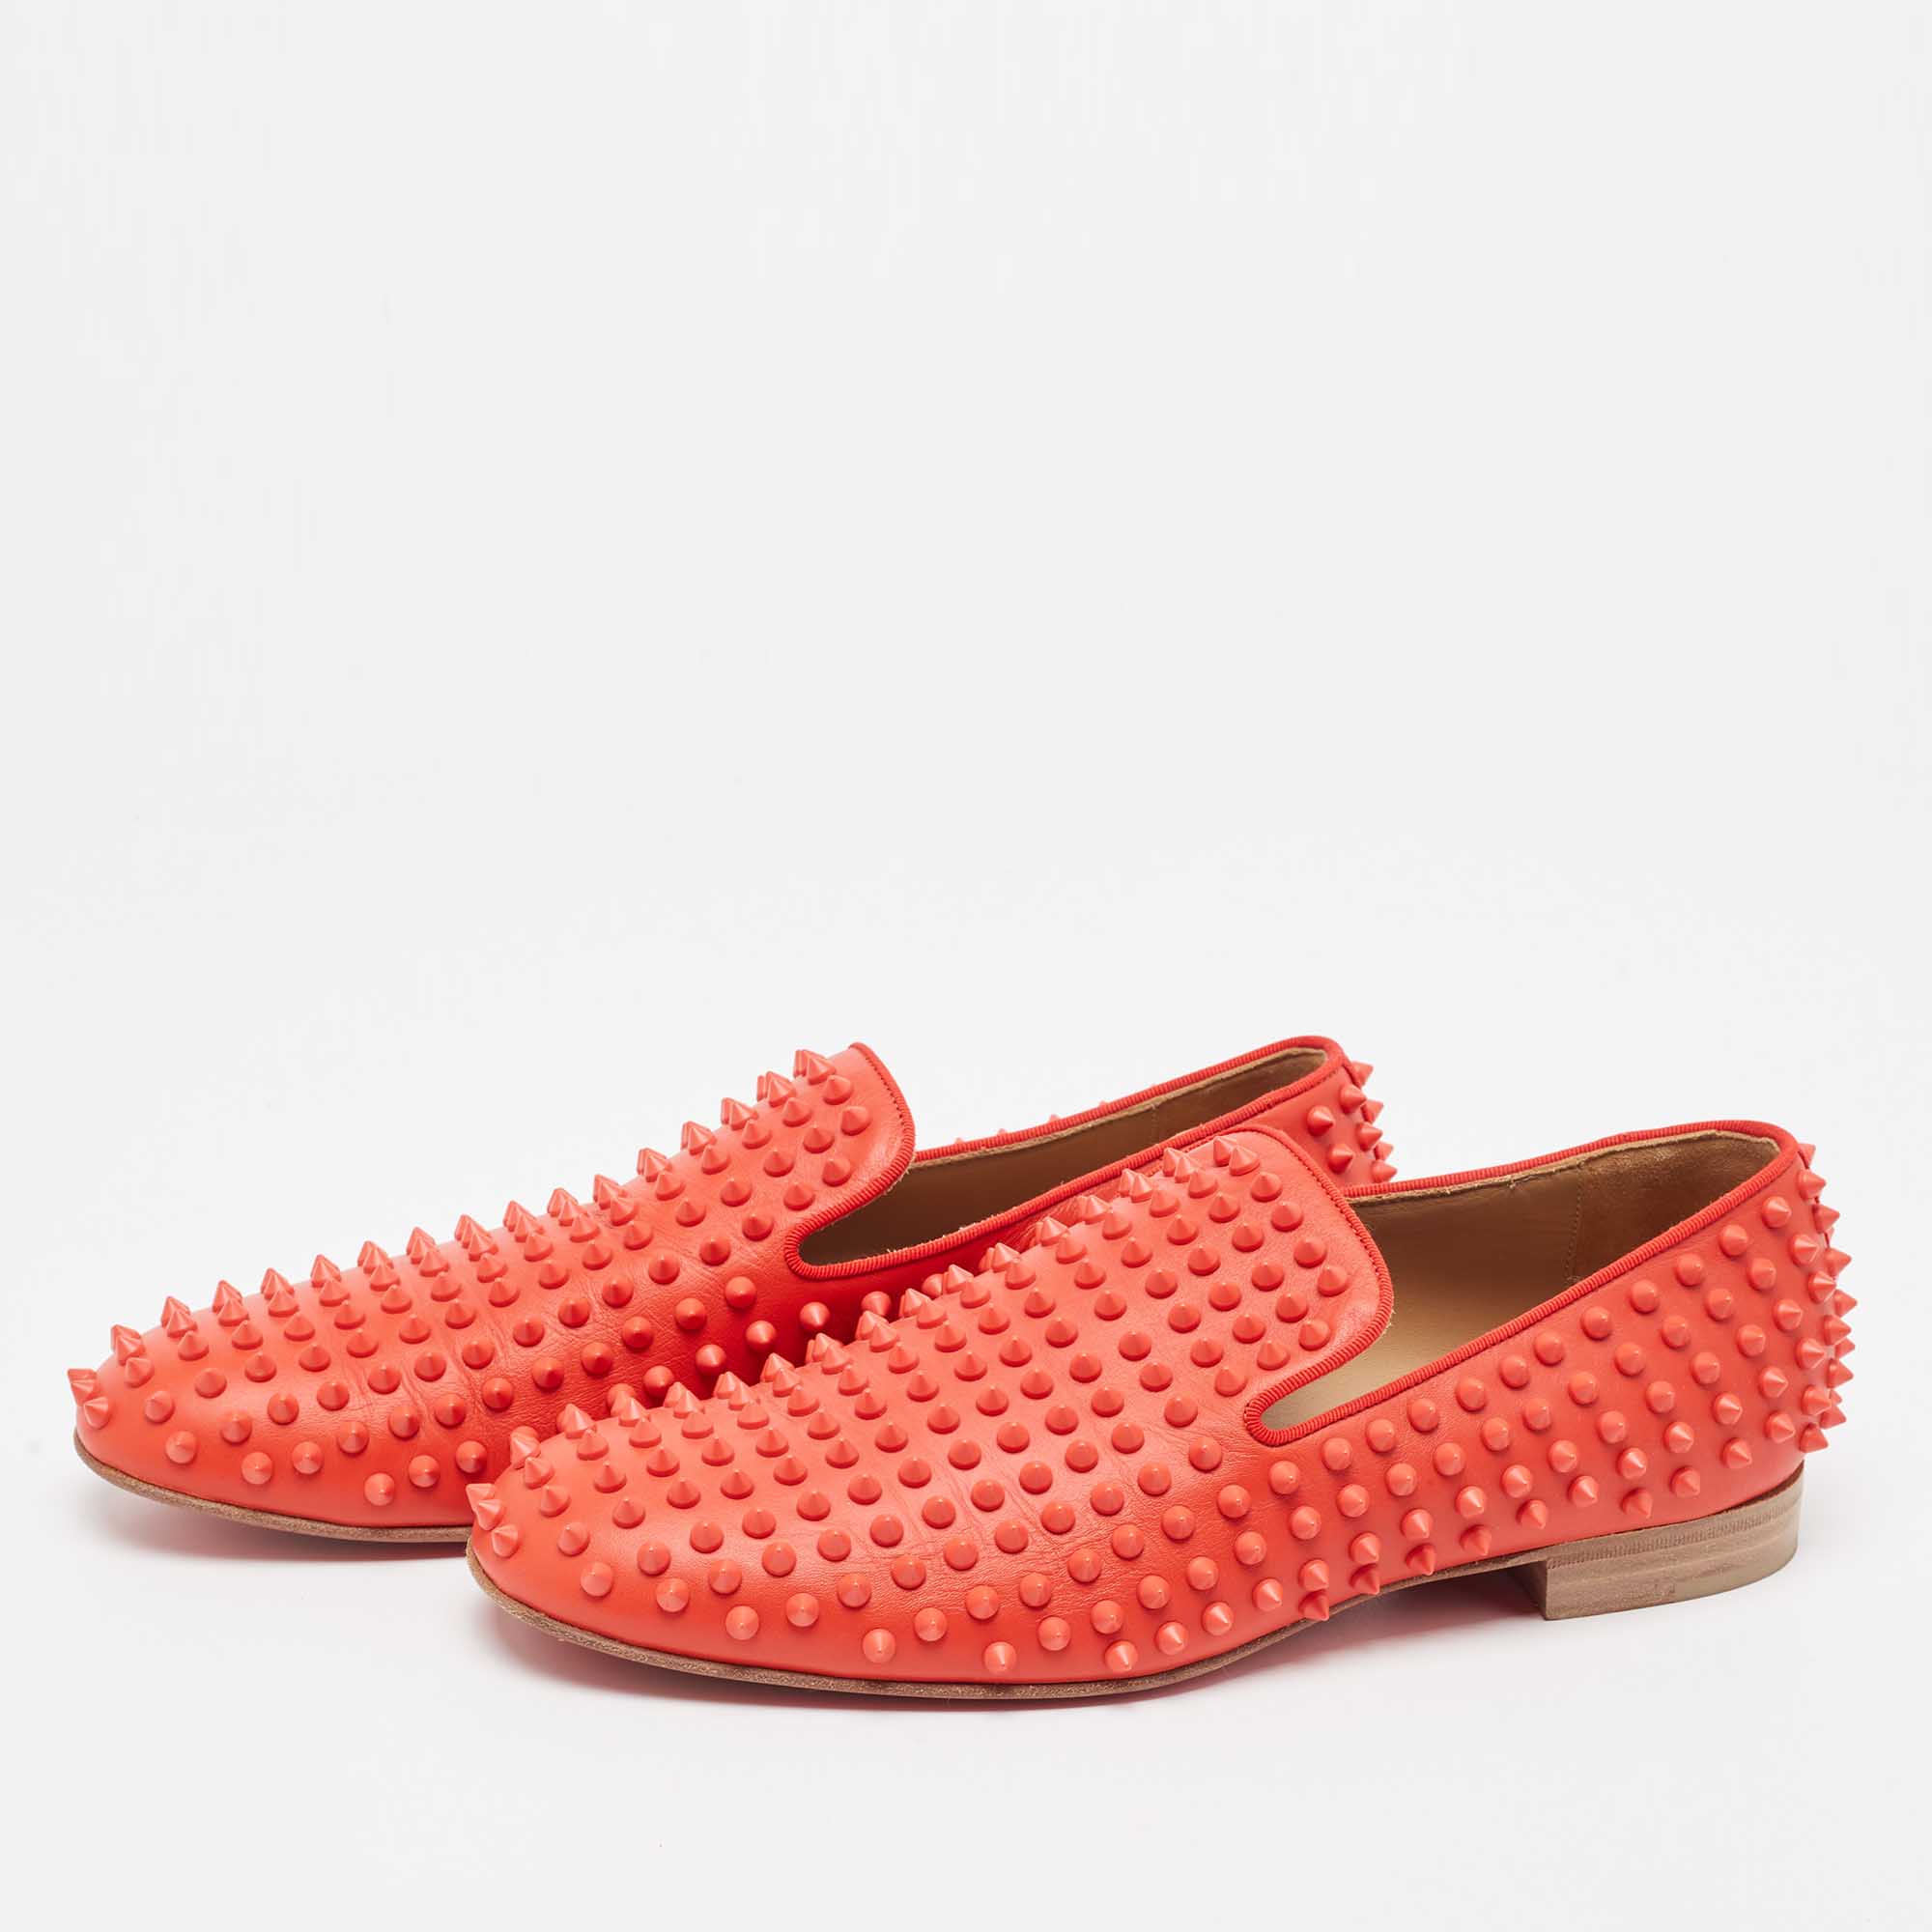 

Christian Louboutin Red Leather Rollerboy Spikes Slip On Smoking Slippers Size